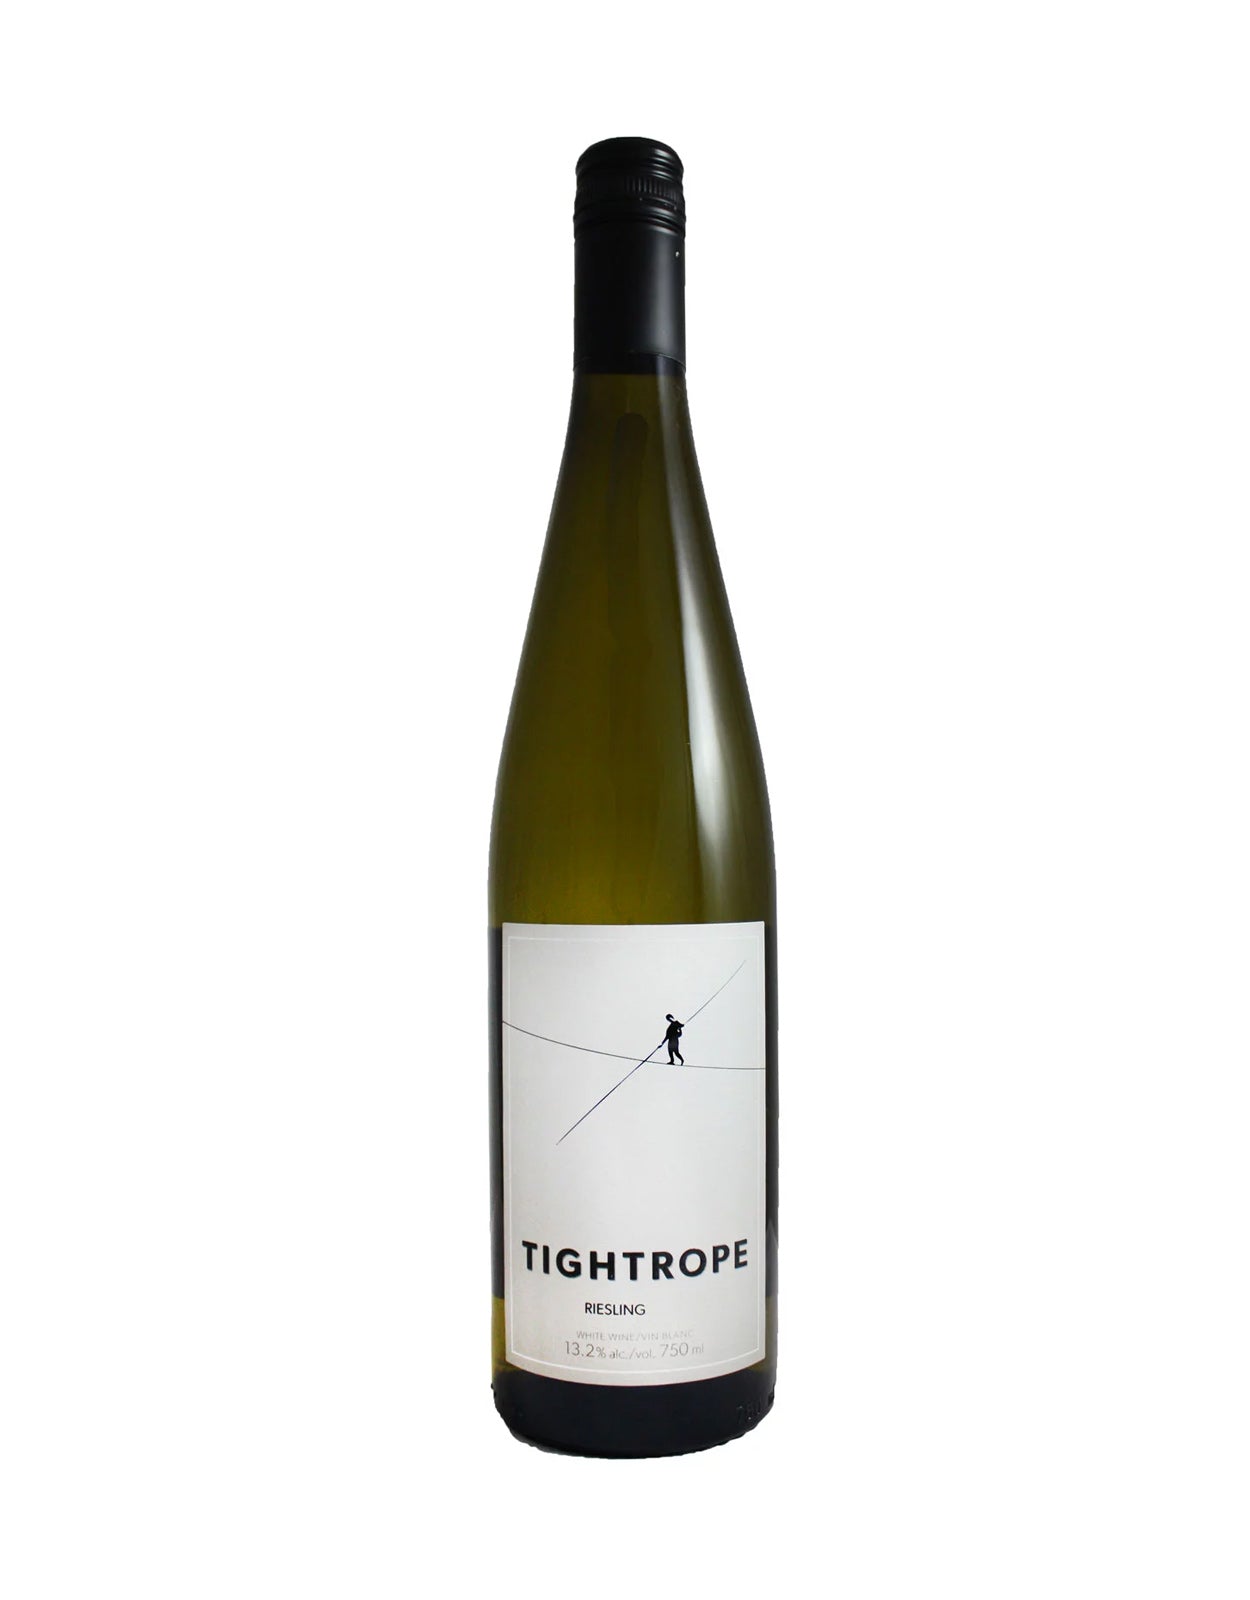 Tightrope Riesling 2017